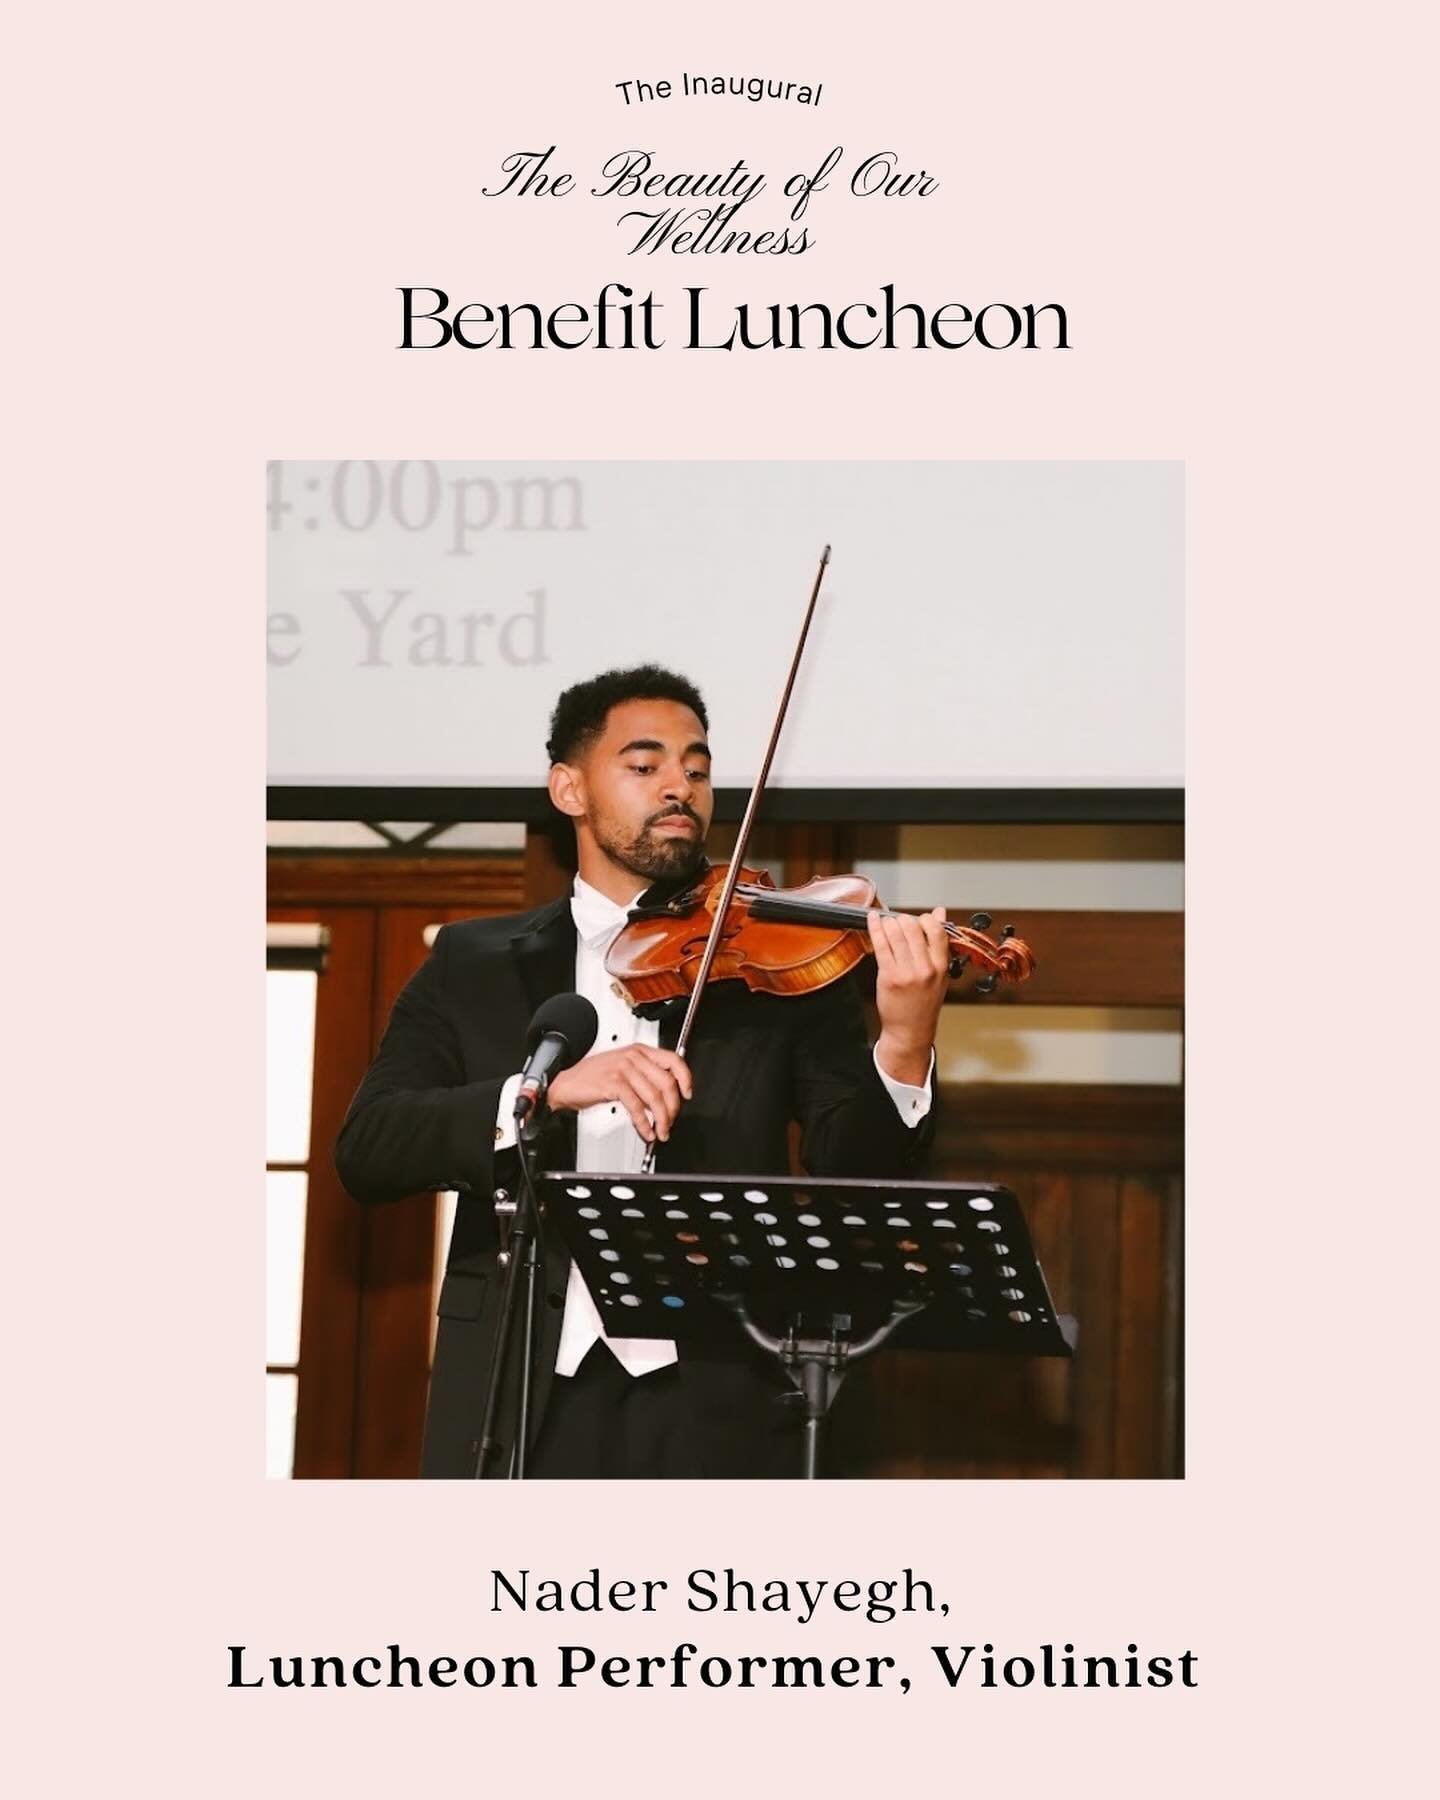 🌸 We&rsquo;re excited to introduce our wonderfully talented event musician, Nader Shayegh. A third-year Medical Student at Howard University College of Medicine from California, Shayegh is passionate about enhancing healthcare accessibility and equi